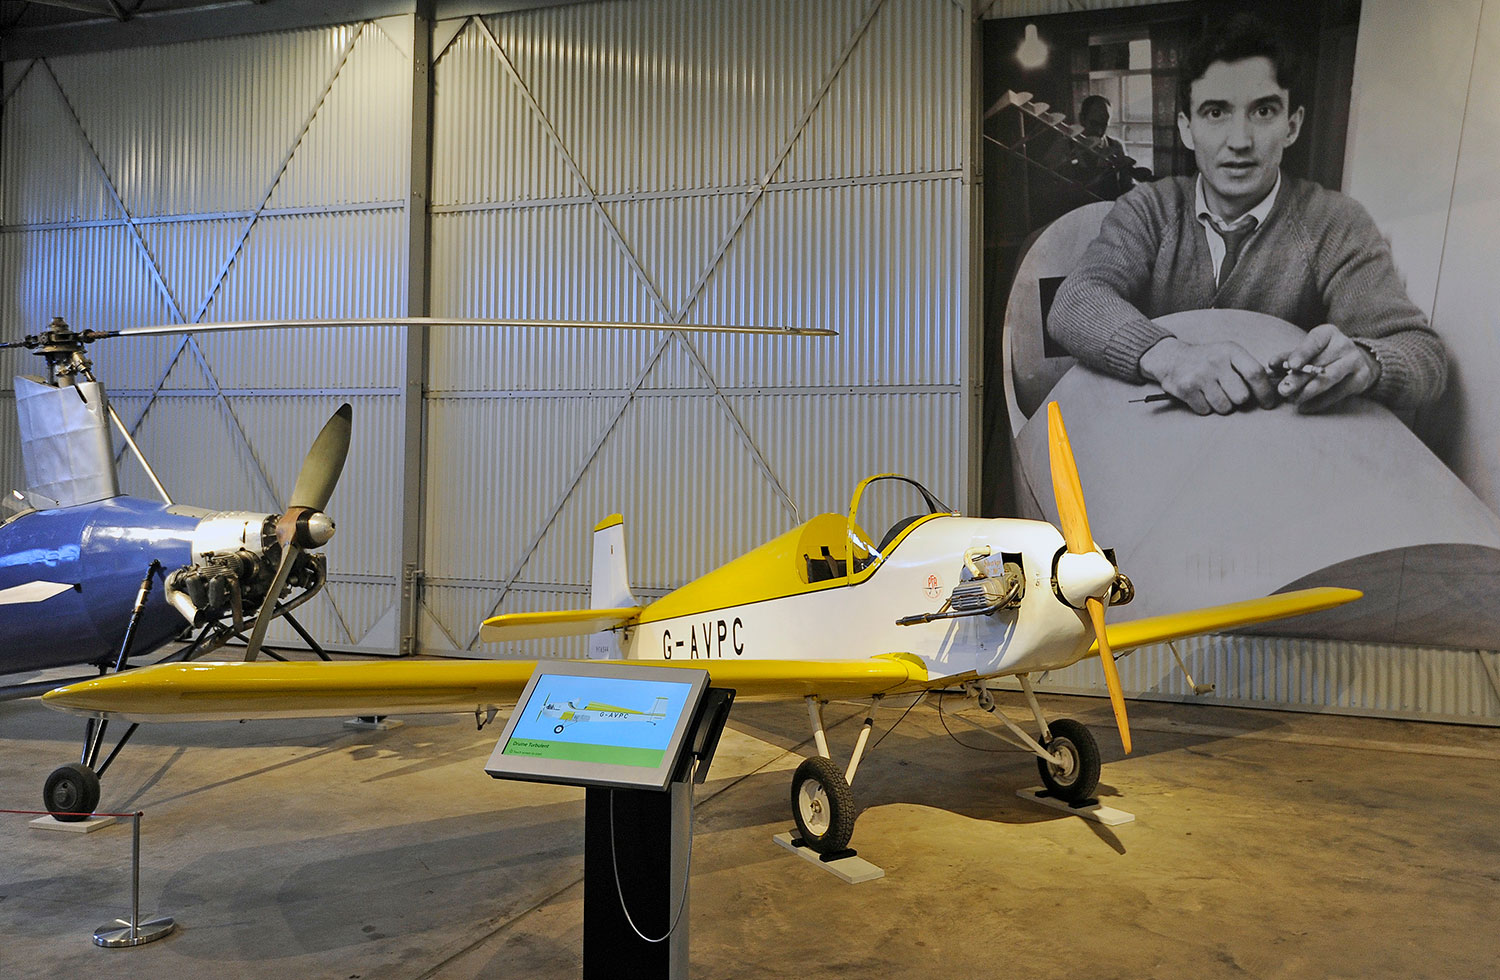 Druine Turbulent aircraft built by John Sharp, with a photo of Sharp behind it.